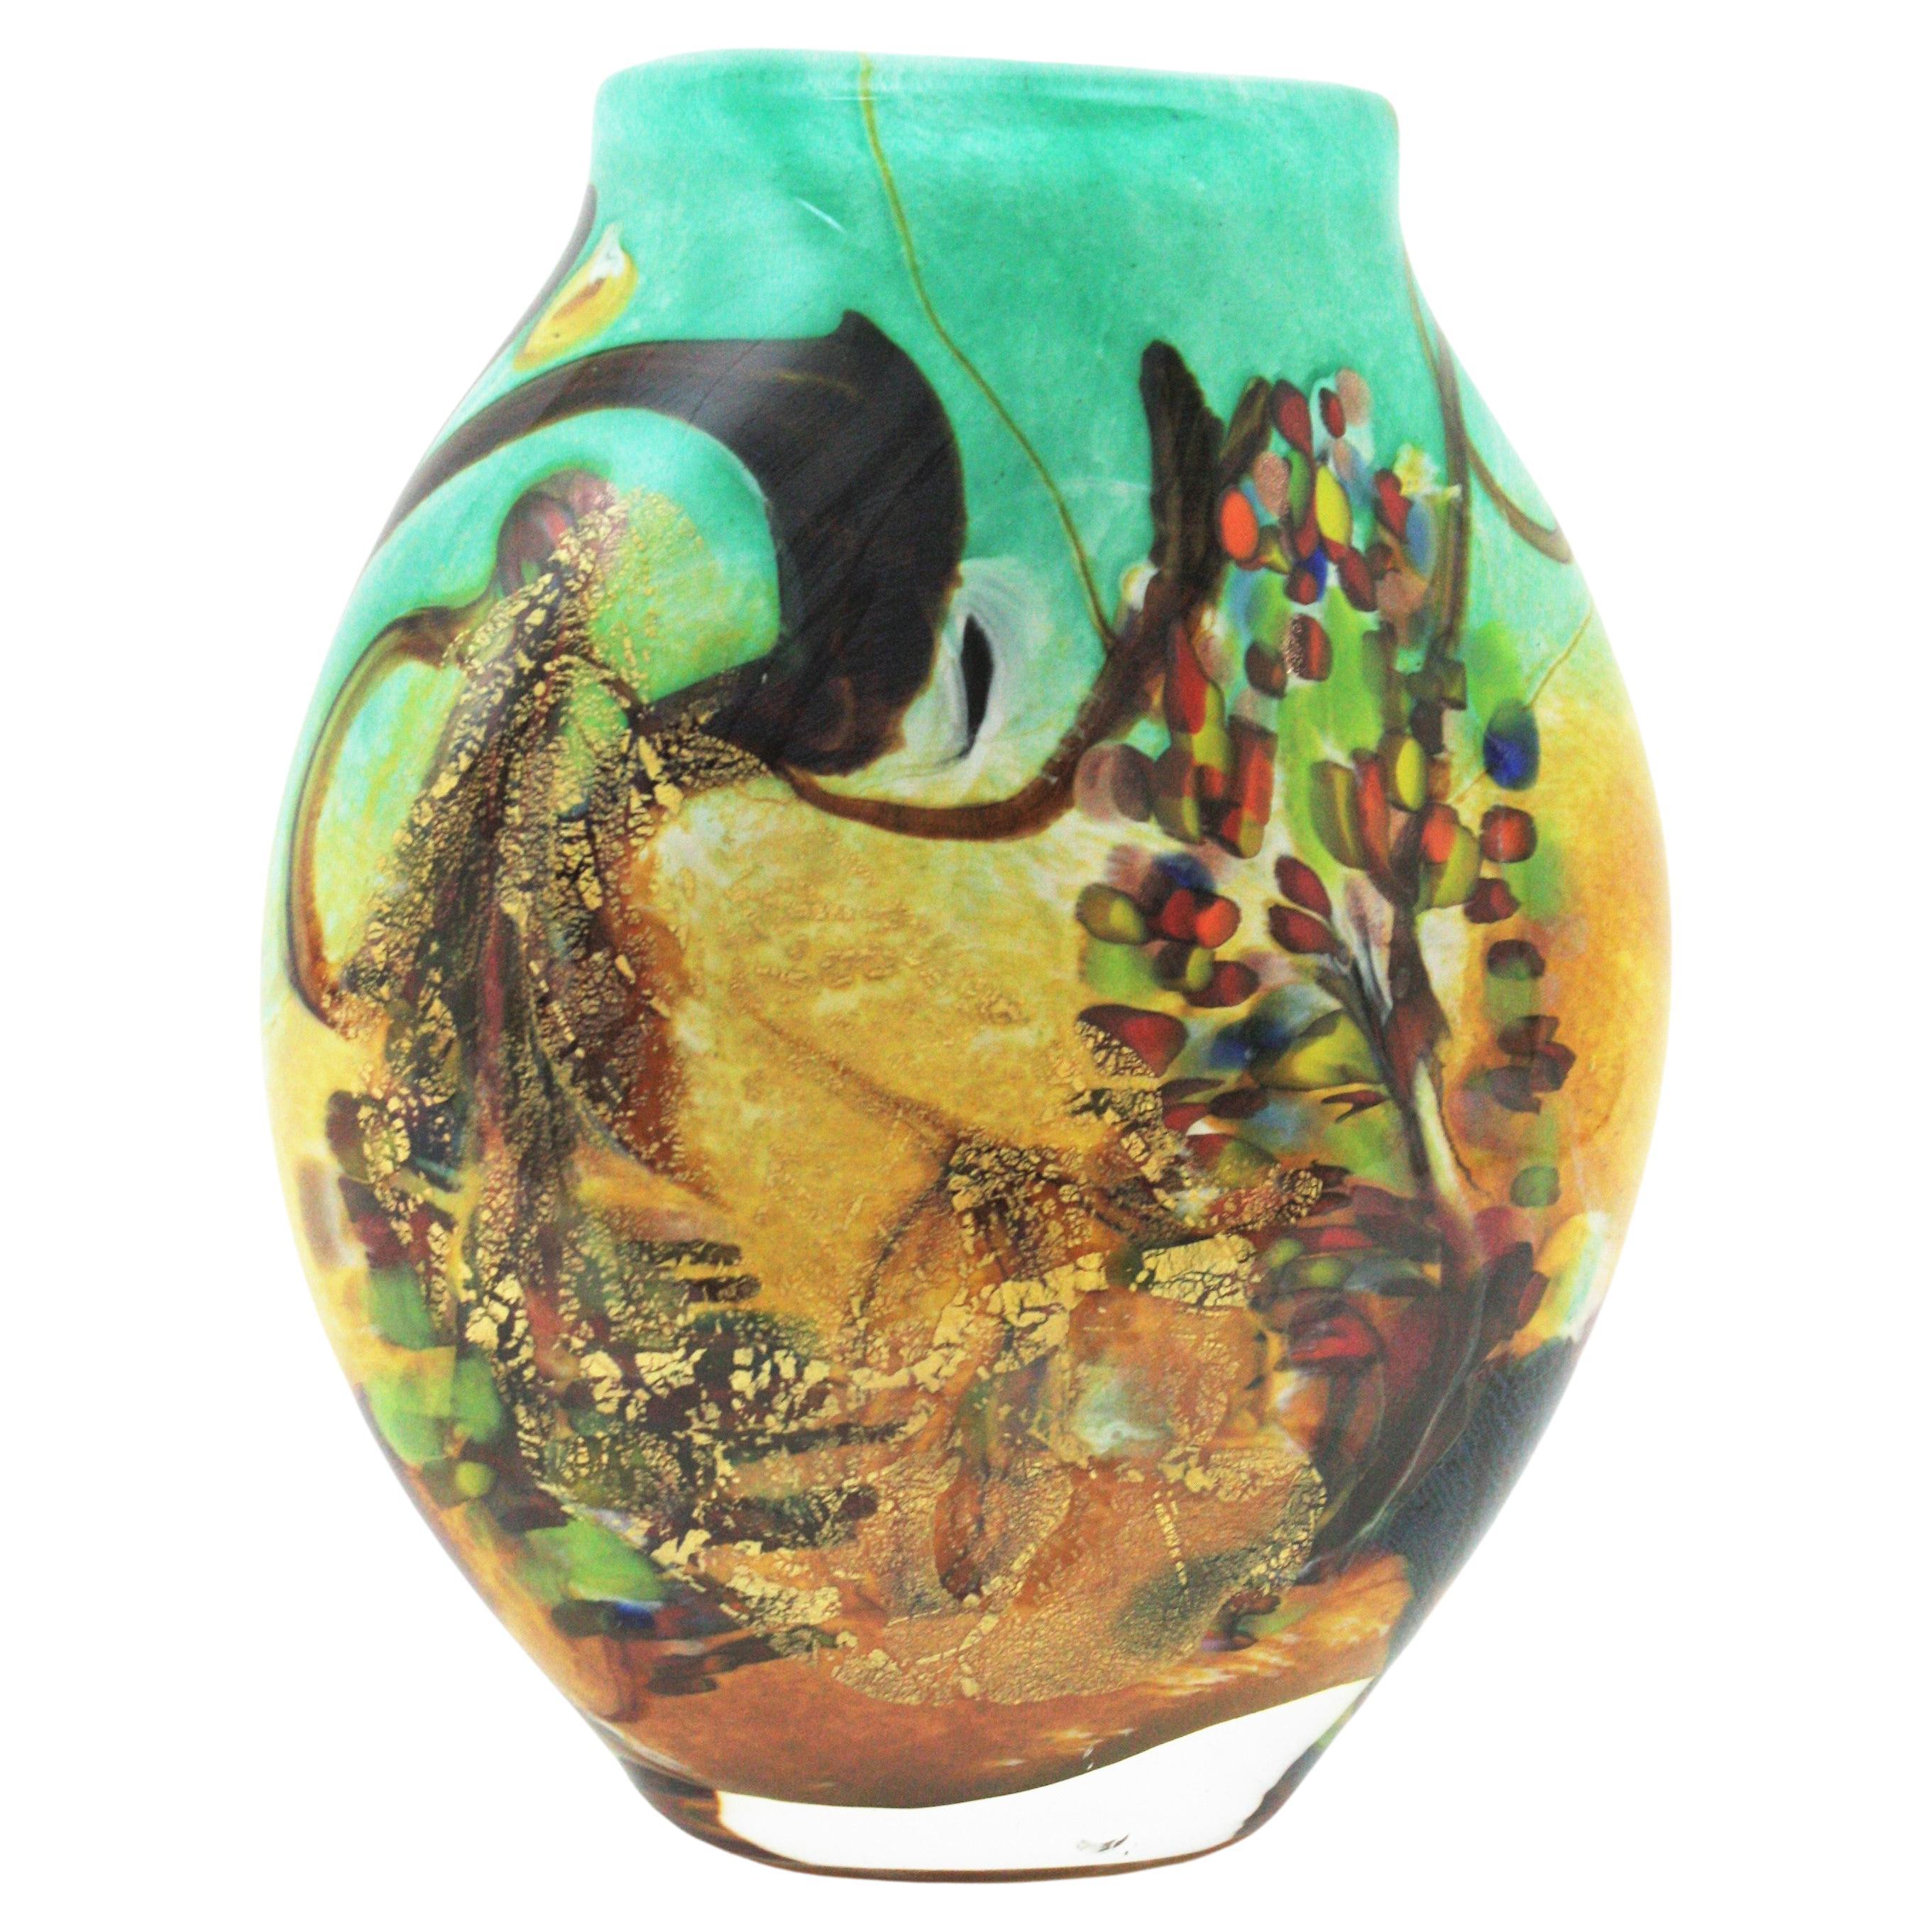 Hand blown Murano multicolor murrine art glass vase with gold leaf flecks. Attributed to Arte Vetraria Muranese (A.V.E.M.), Italy, 1950s.
Exquisite and sculptural handblown Murano glass vase with an eye-catching 'Tutti Frutti' design different from